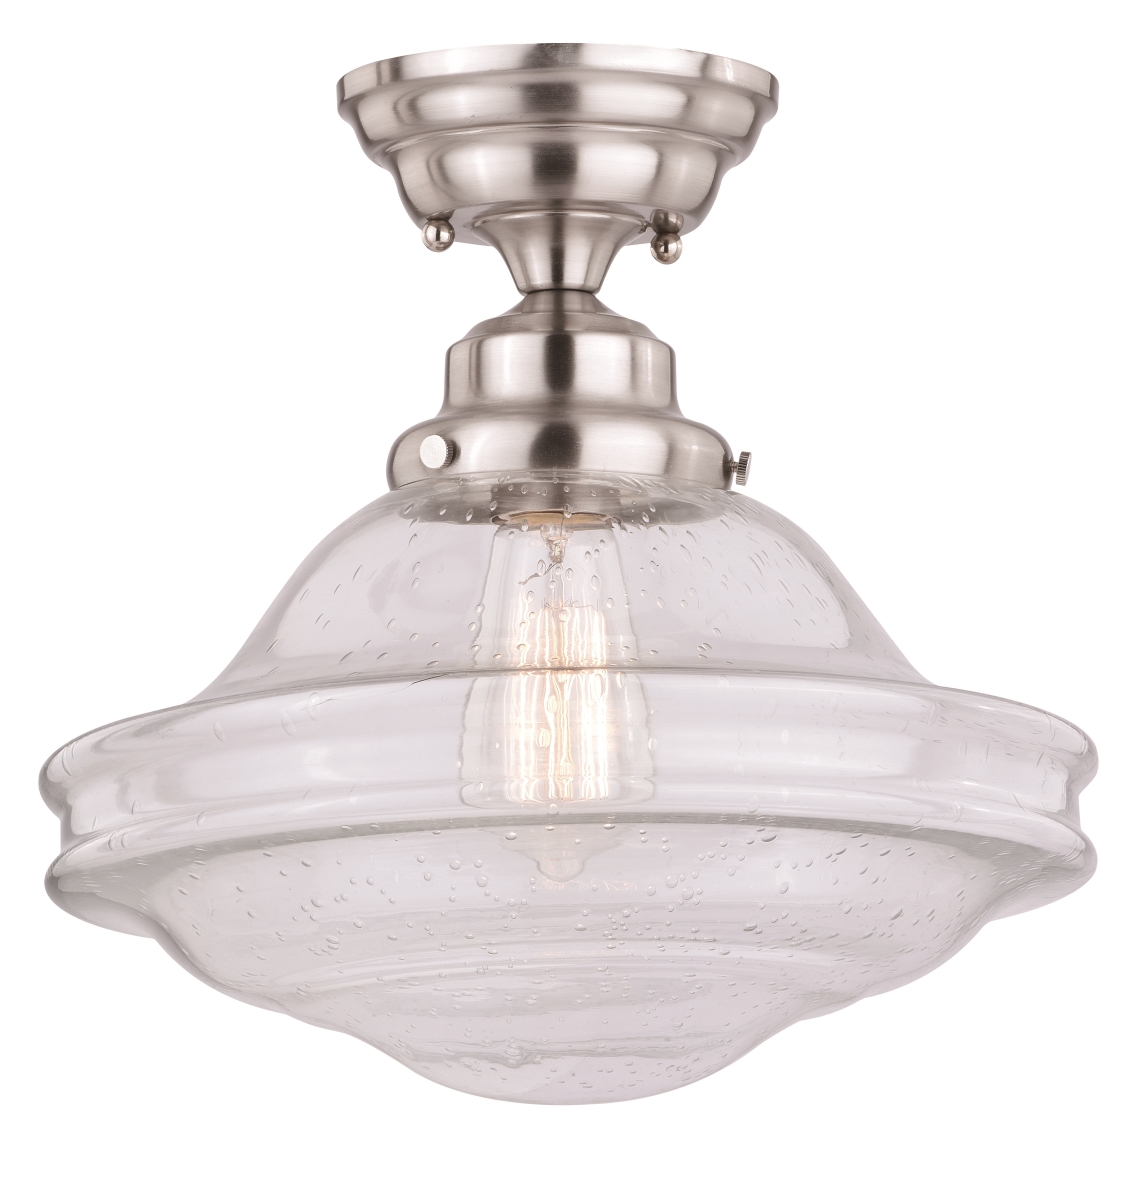 C0197 12 In. Huntley Semi-flush Mount In Satin Nickel With Clear Seeded Glass